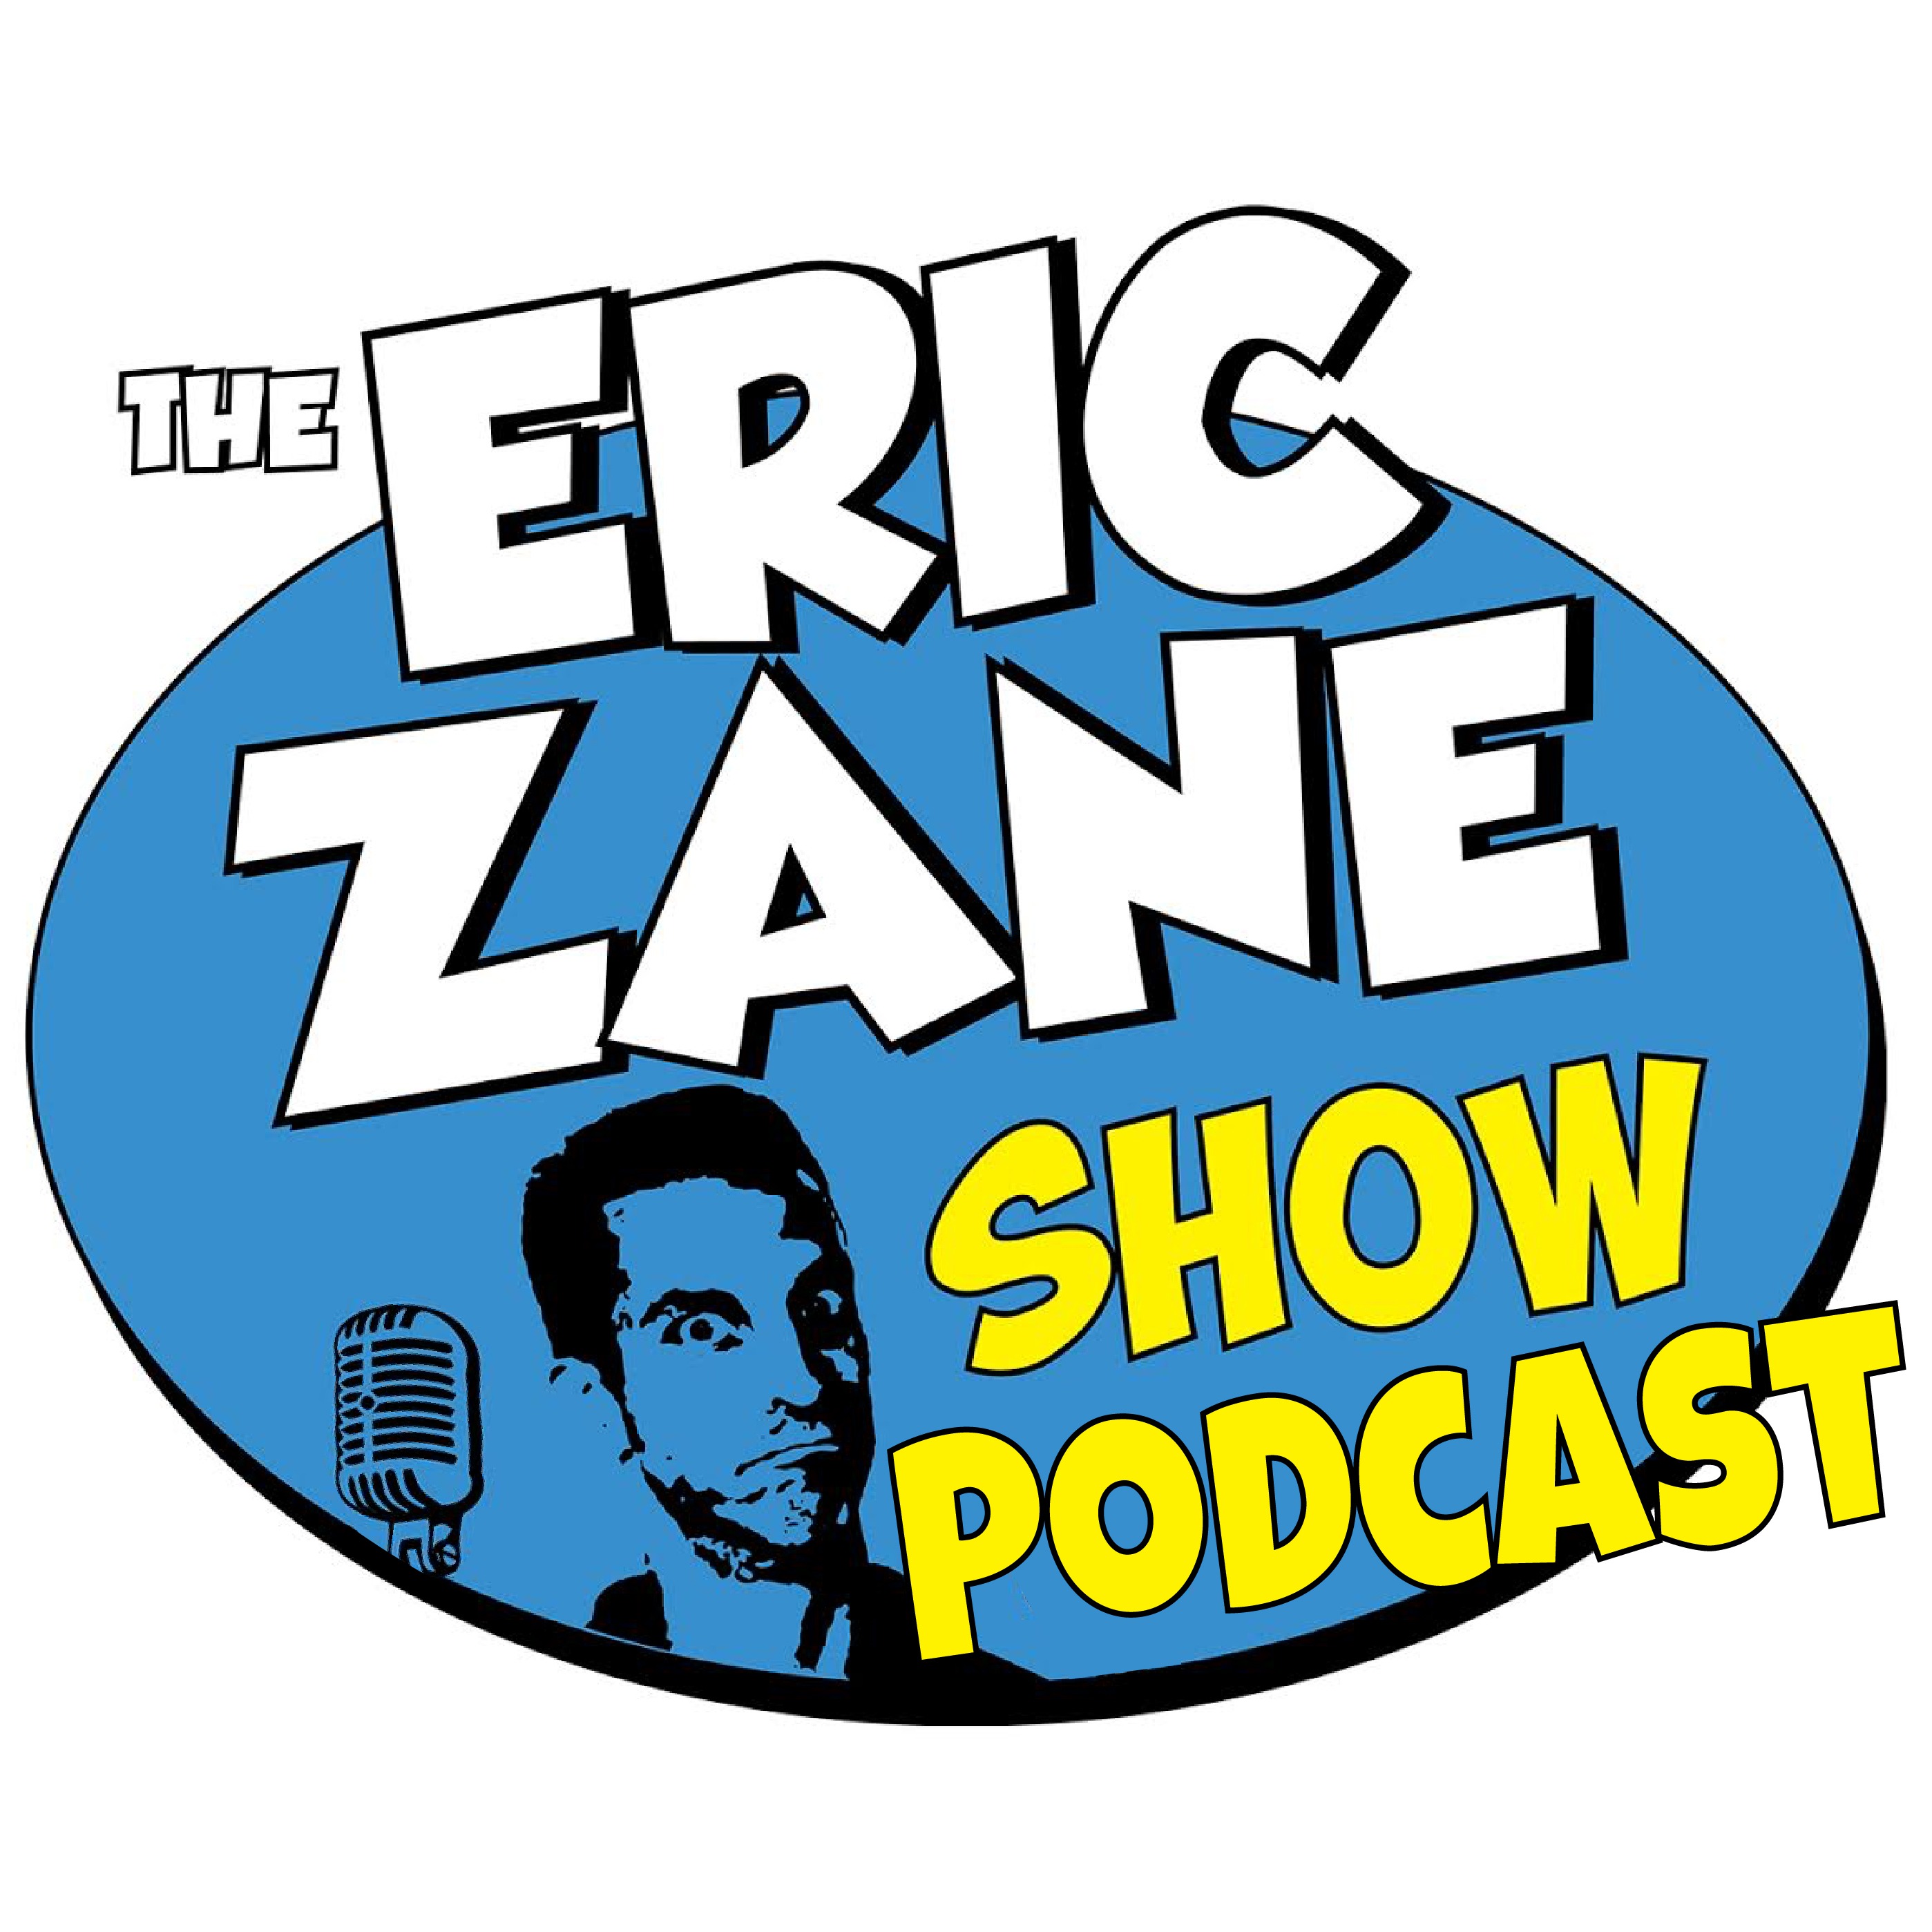 Eric Zane Show Podcast 846 I saved a dude's life at the YMCA